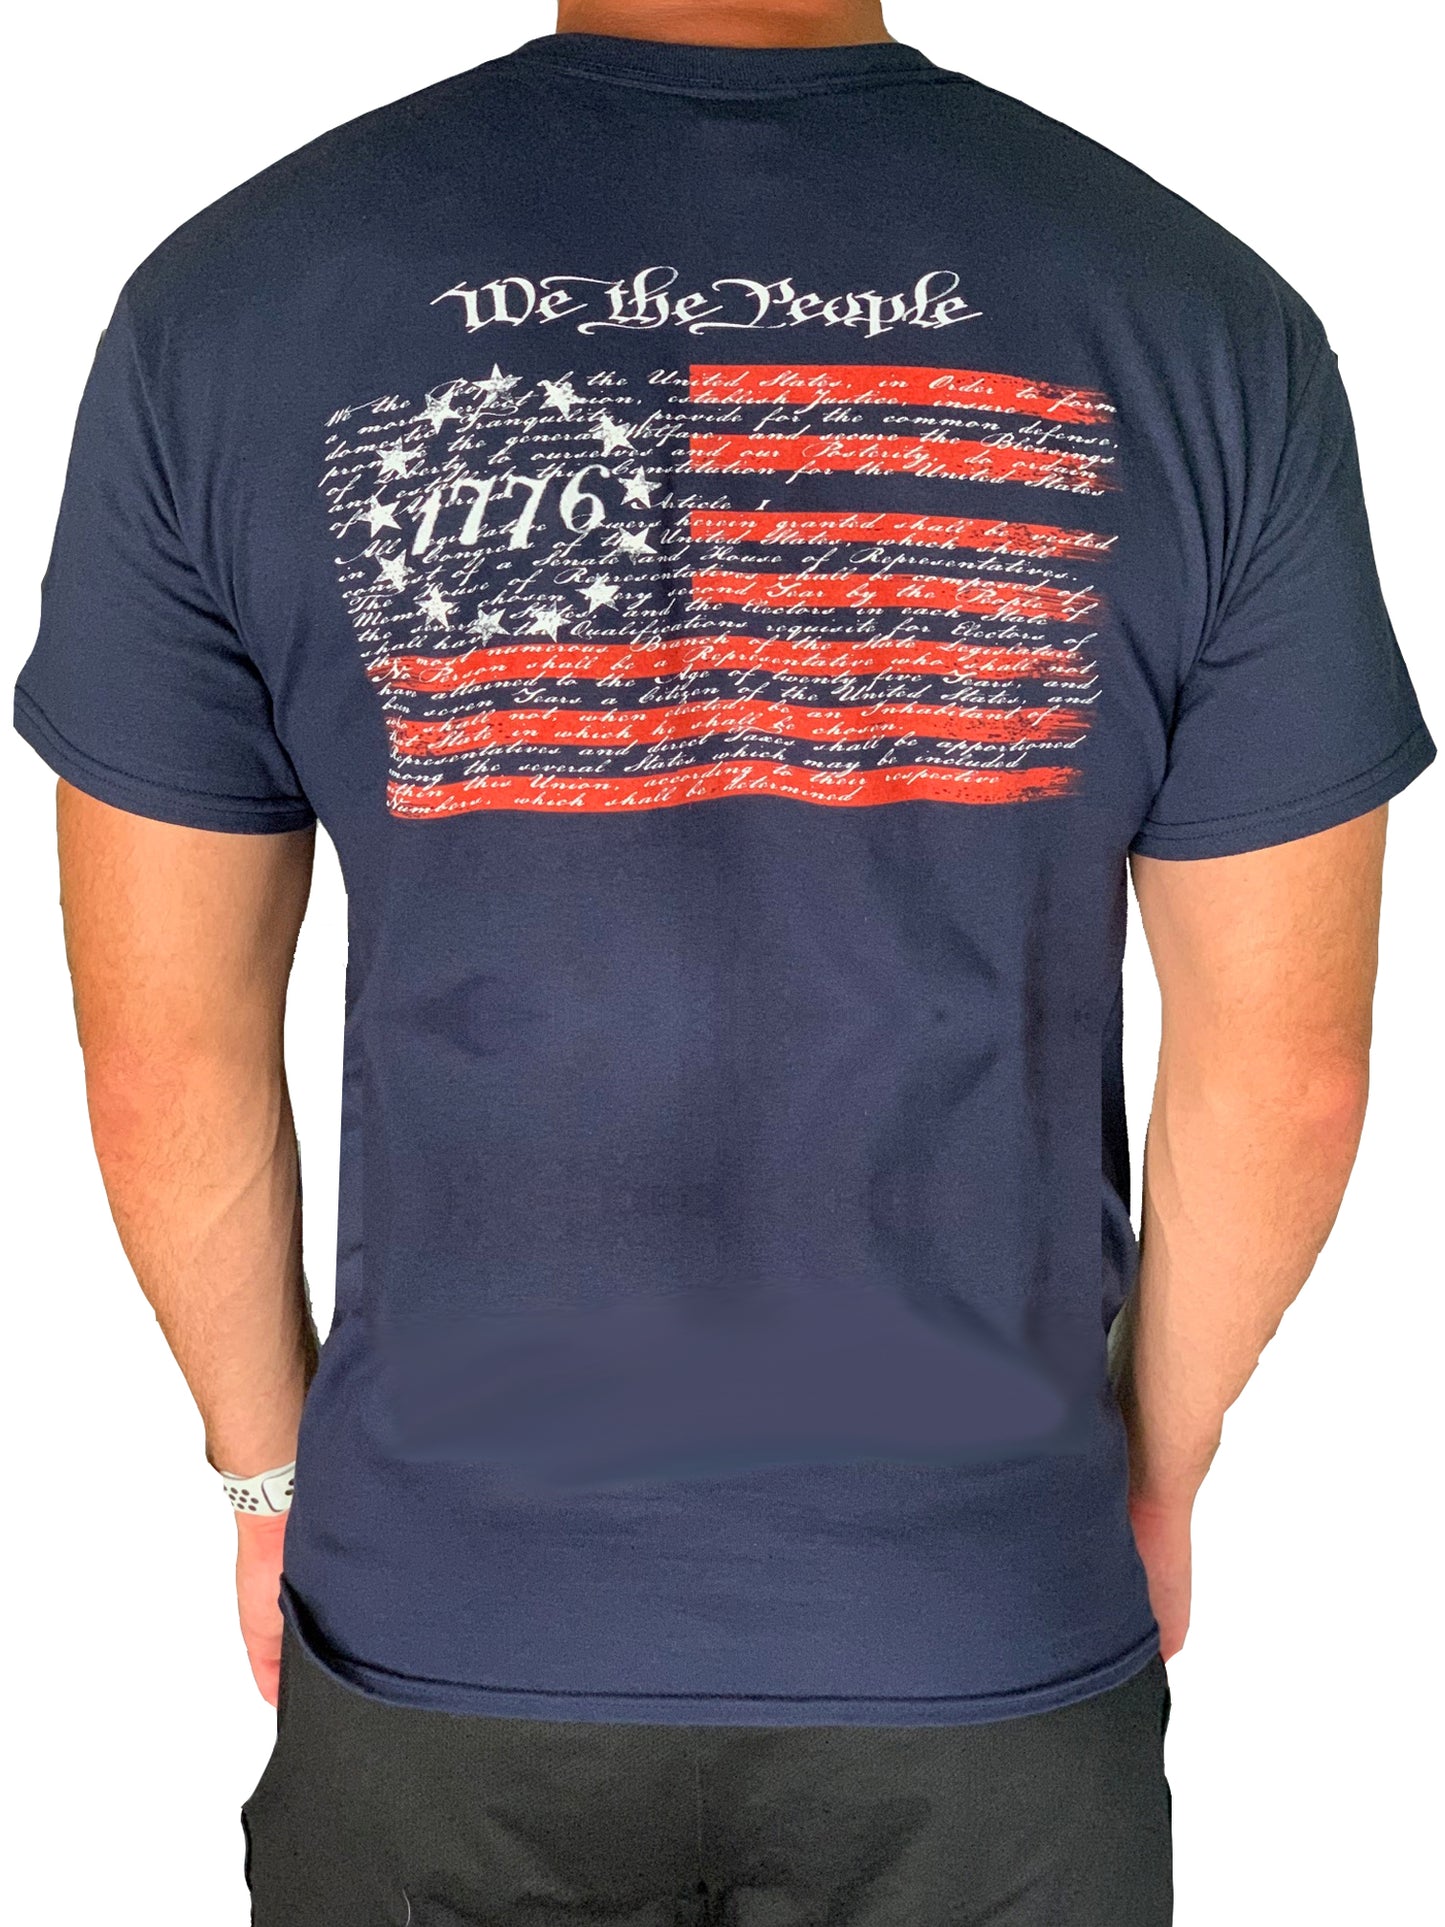 We The People - Navy